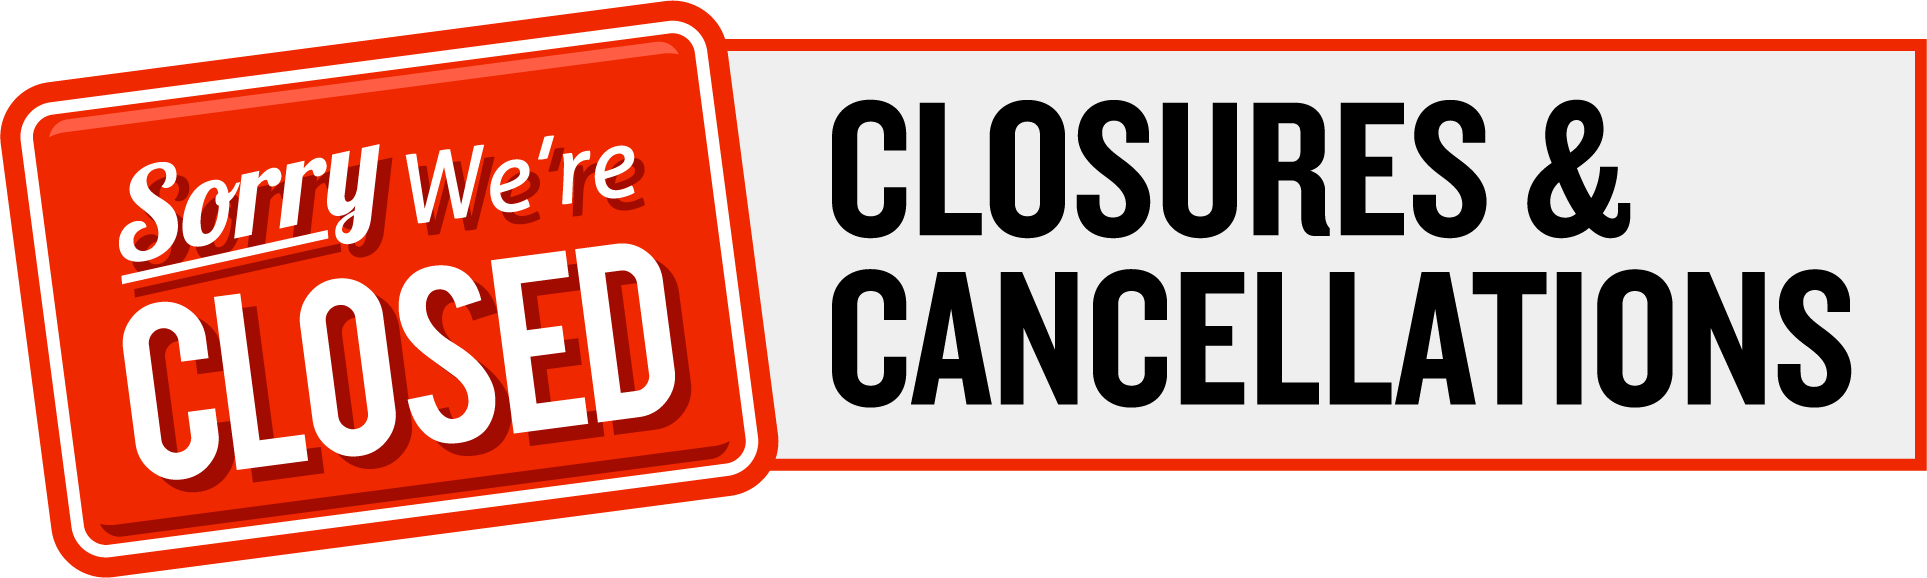 Closed Sign Closures Cancellations PNG image